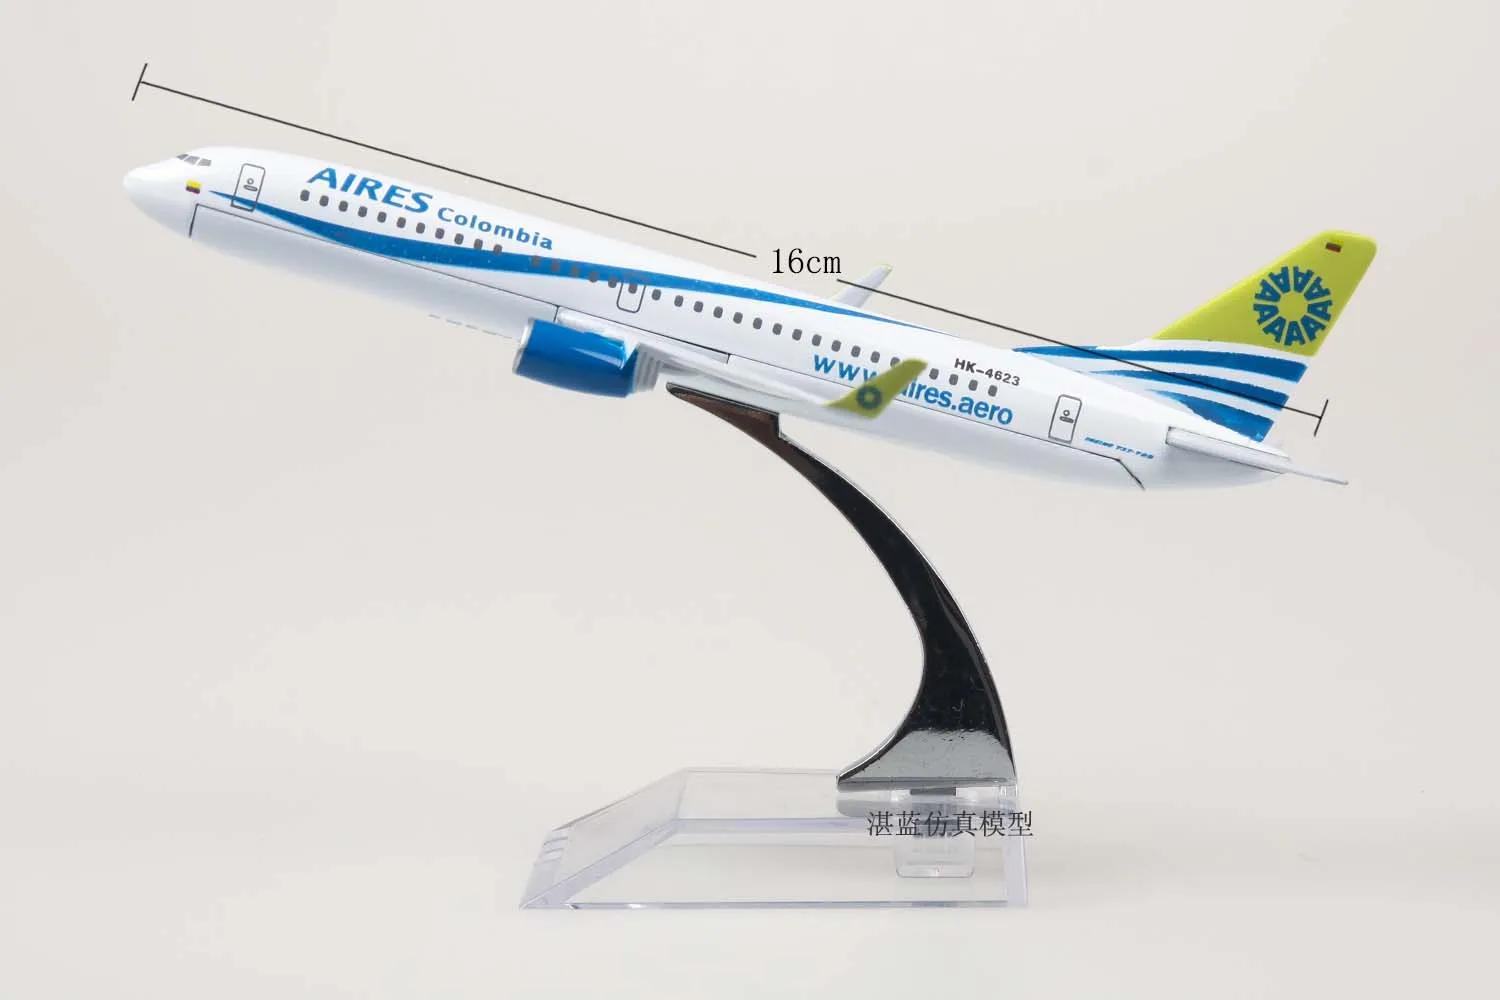 Aires Colombia Boeing 737-800 Passenger Airplane Plane Diecast Aircraft Model 